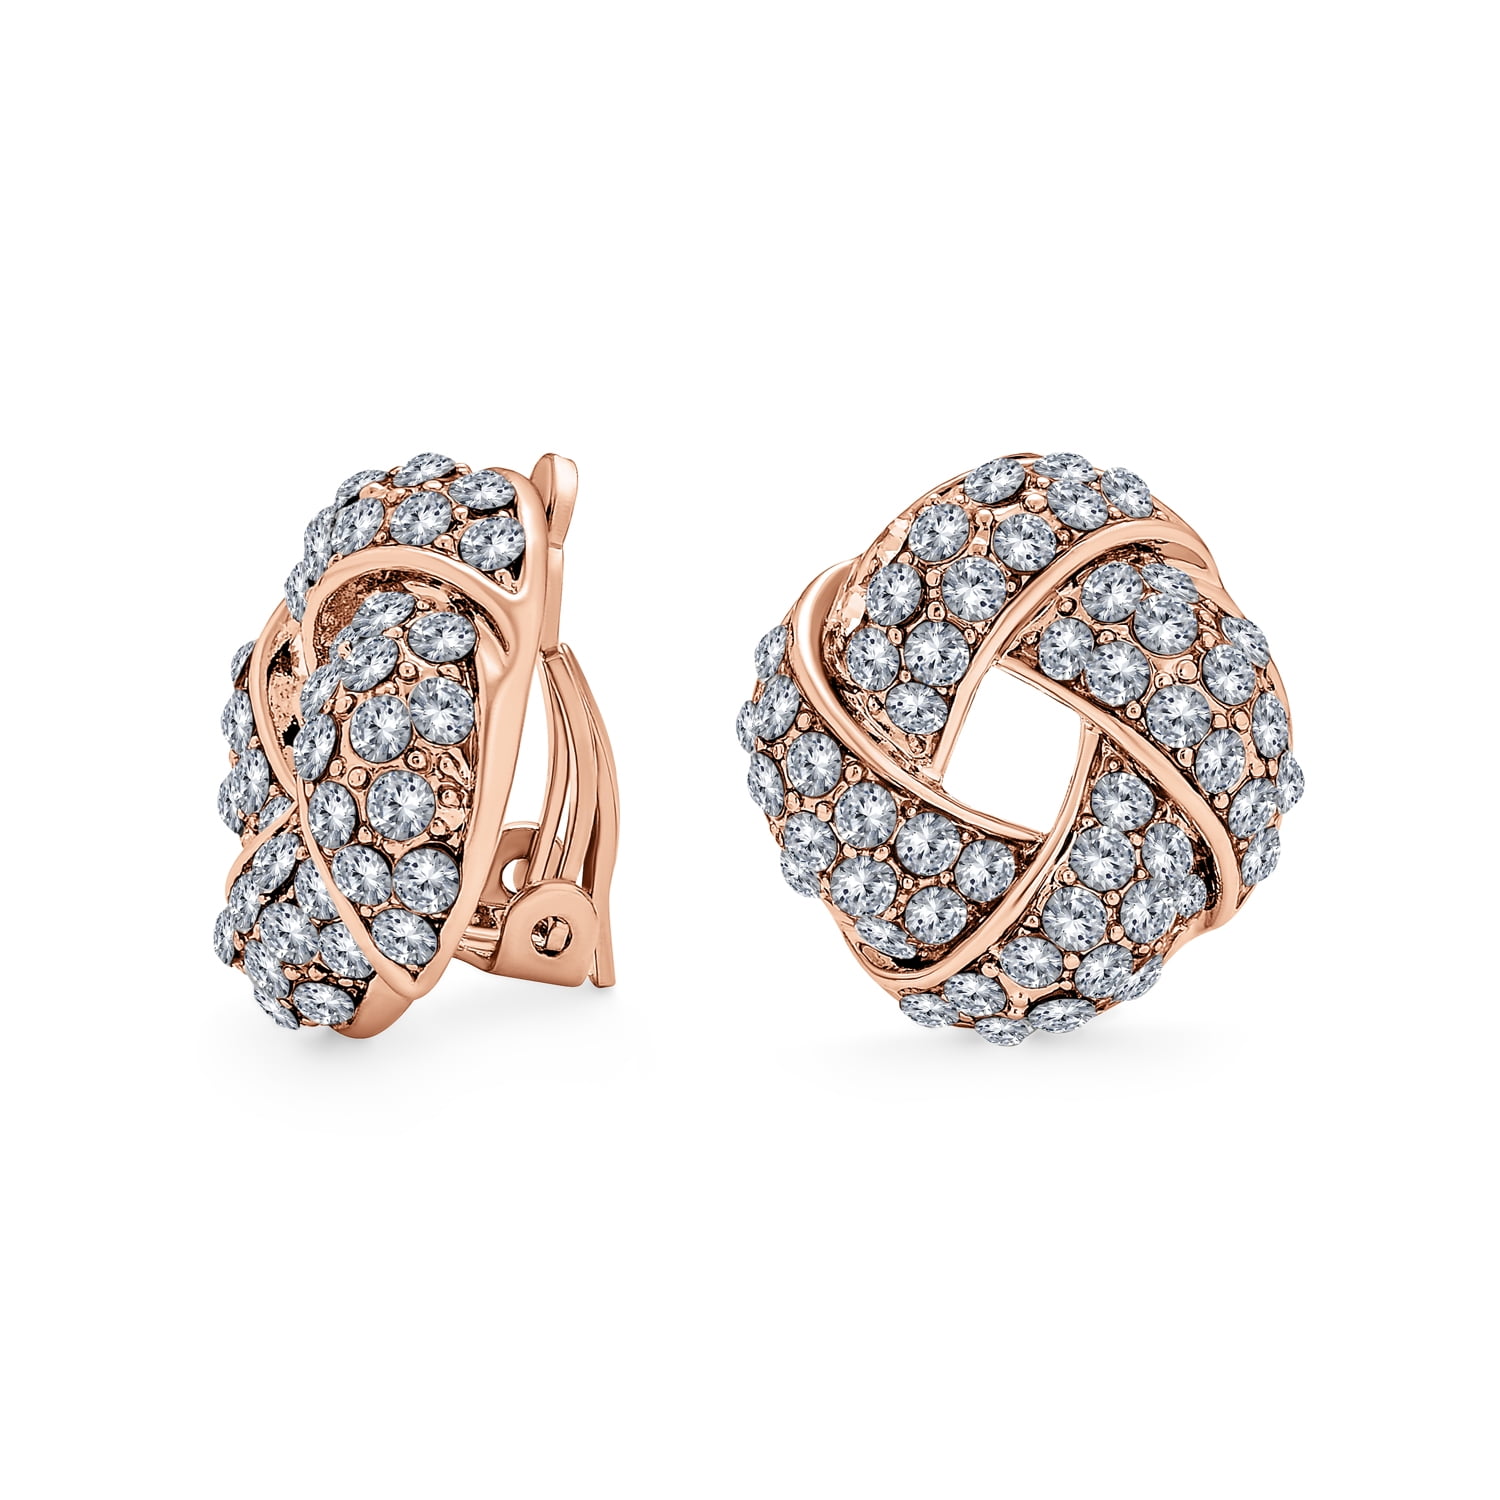 Woven White Crystal Love Knot Clip On Earring Ears Rose Gold Plated ...